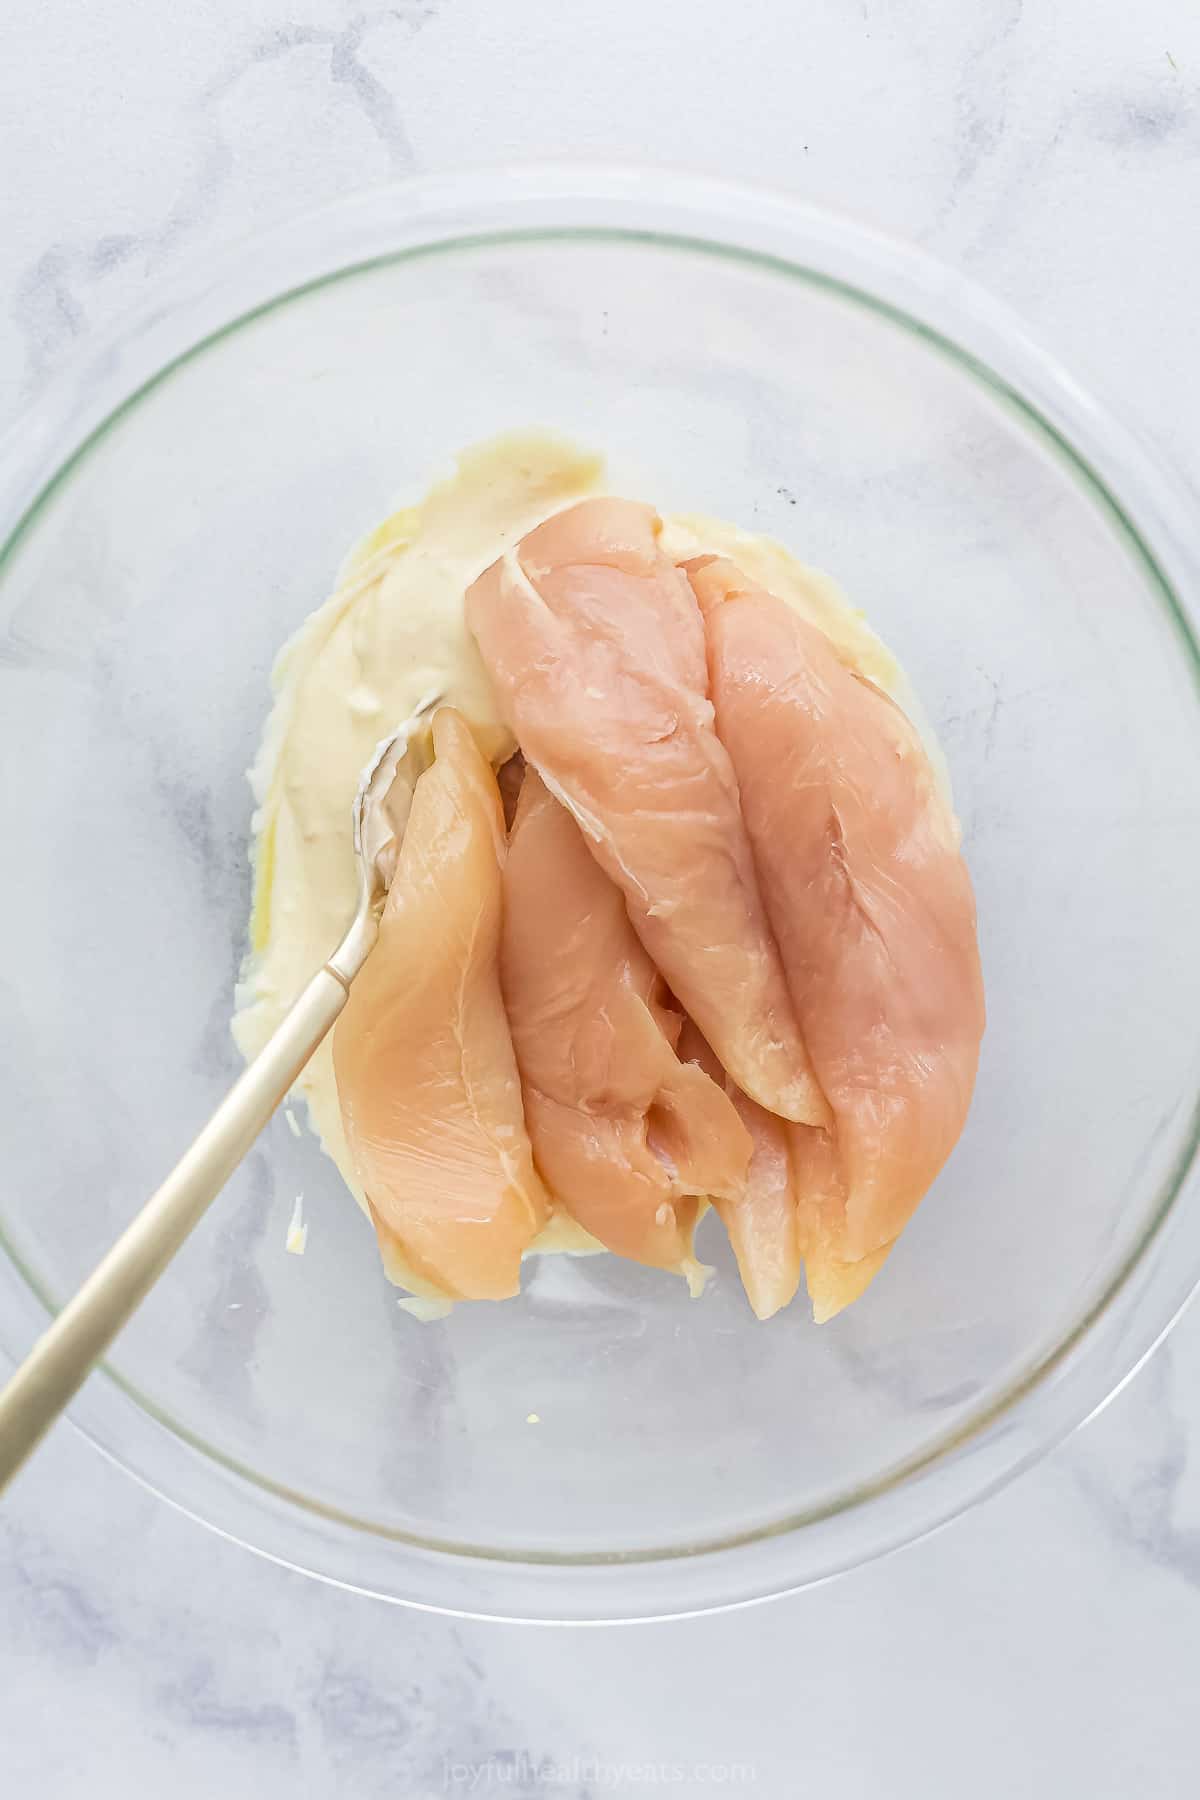 Four raw pieces of chicken in a glass mixing bowl with the mayonnaise mixture